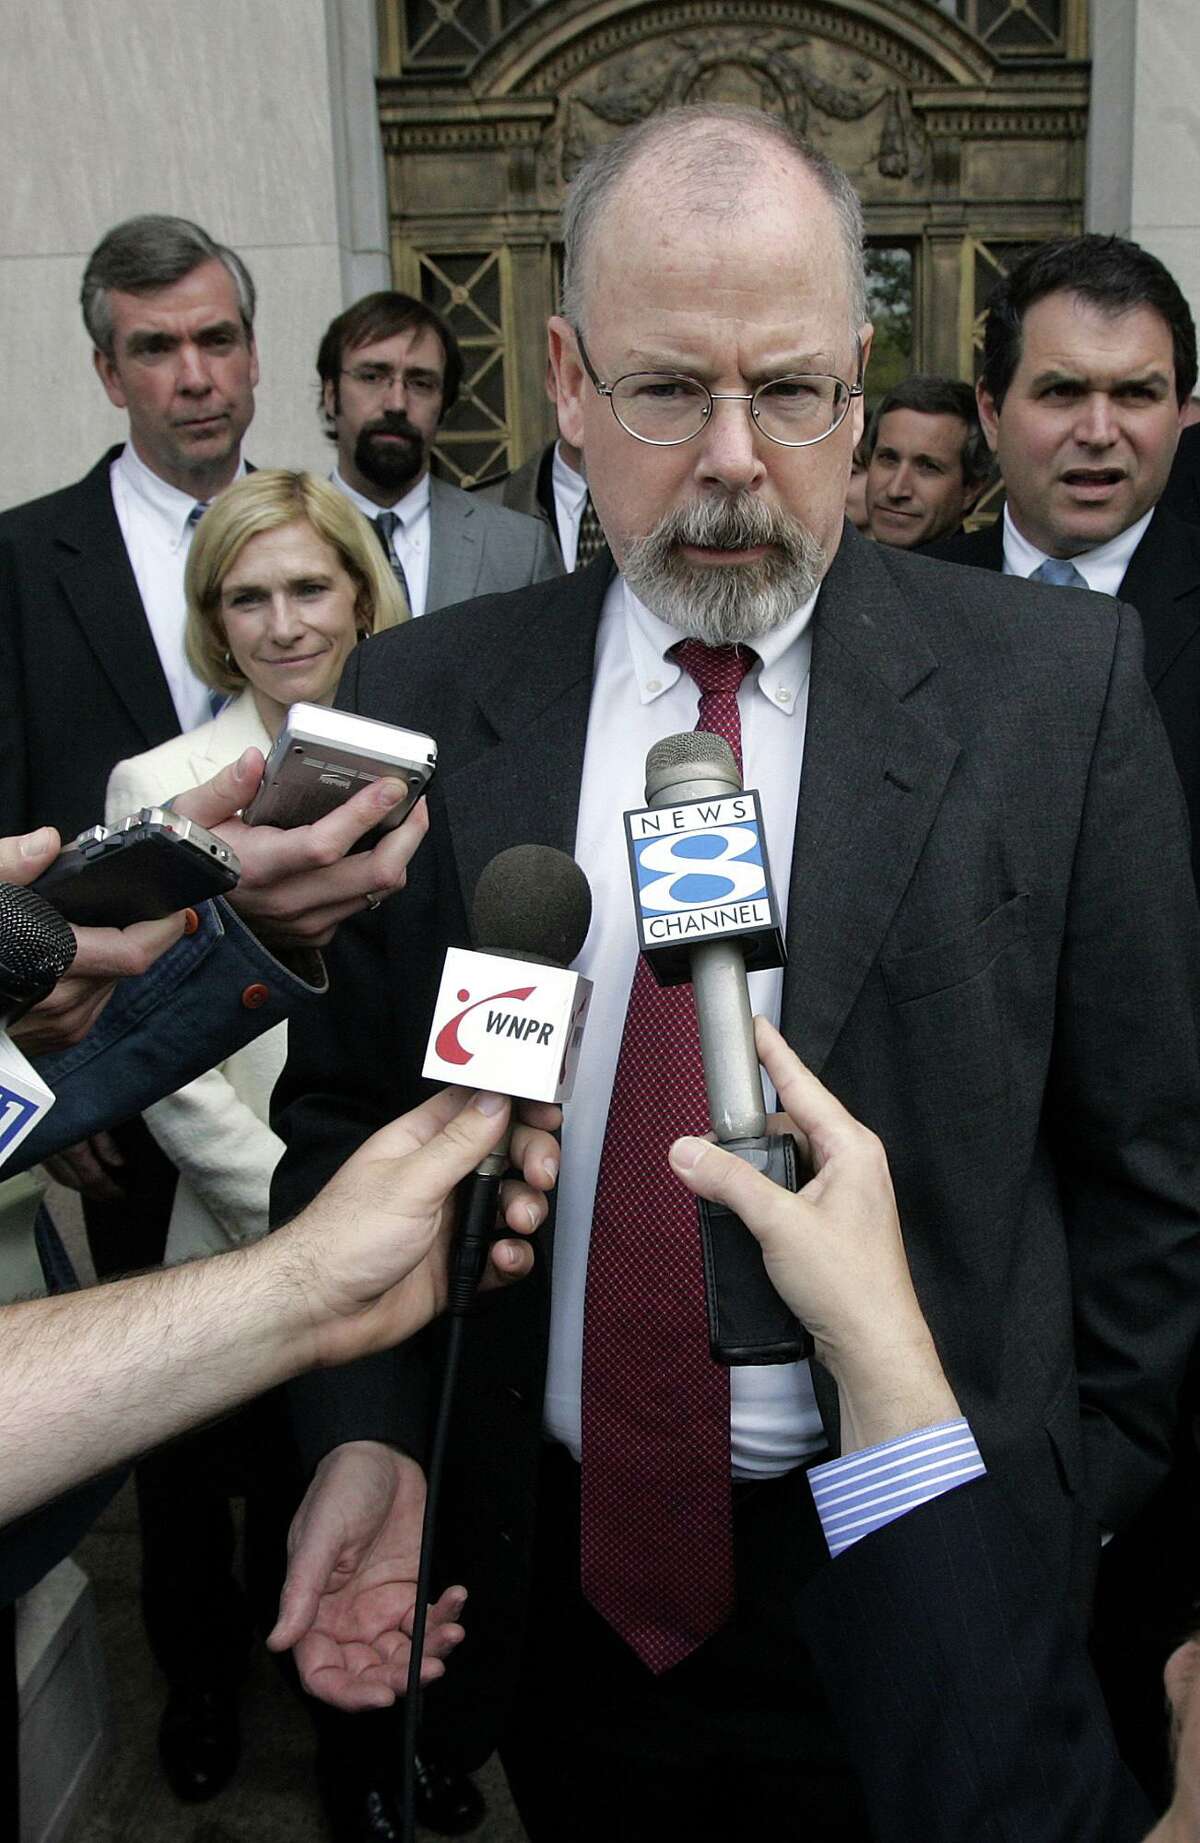 U.S. Attorney for Connecticut John Durham has been tapped by the Trump administration to investigate Ukraine’s potential role in interfering in the 2016 election.